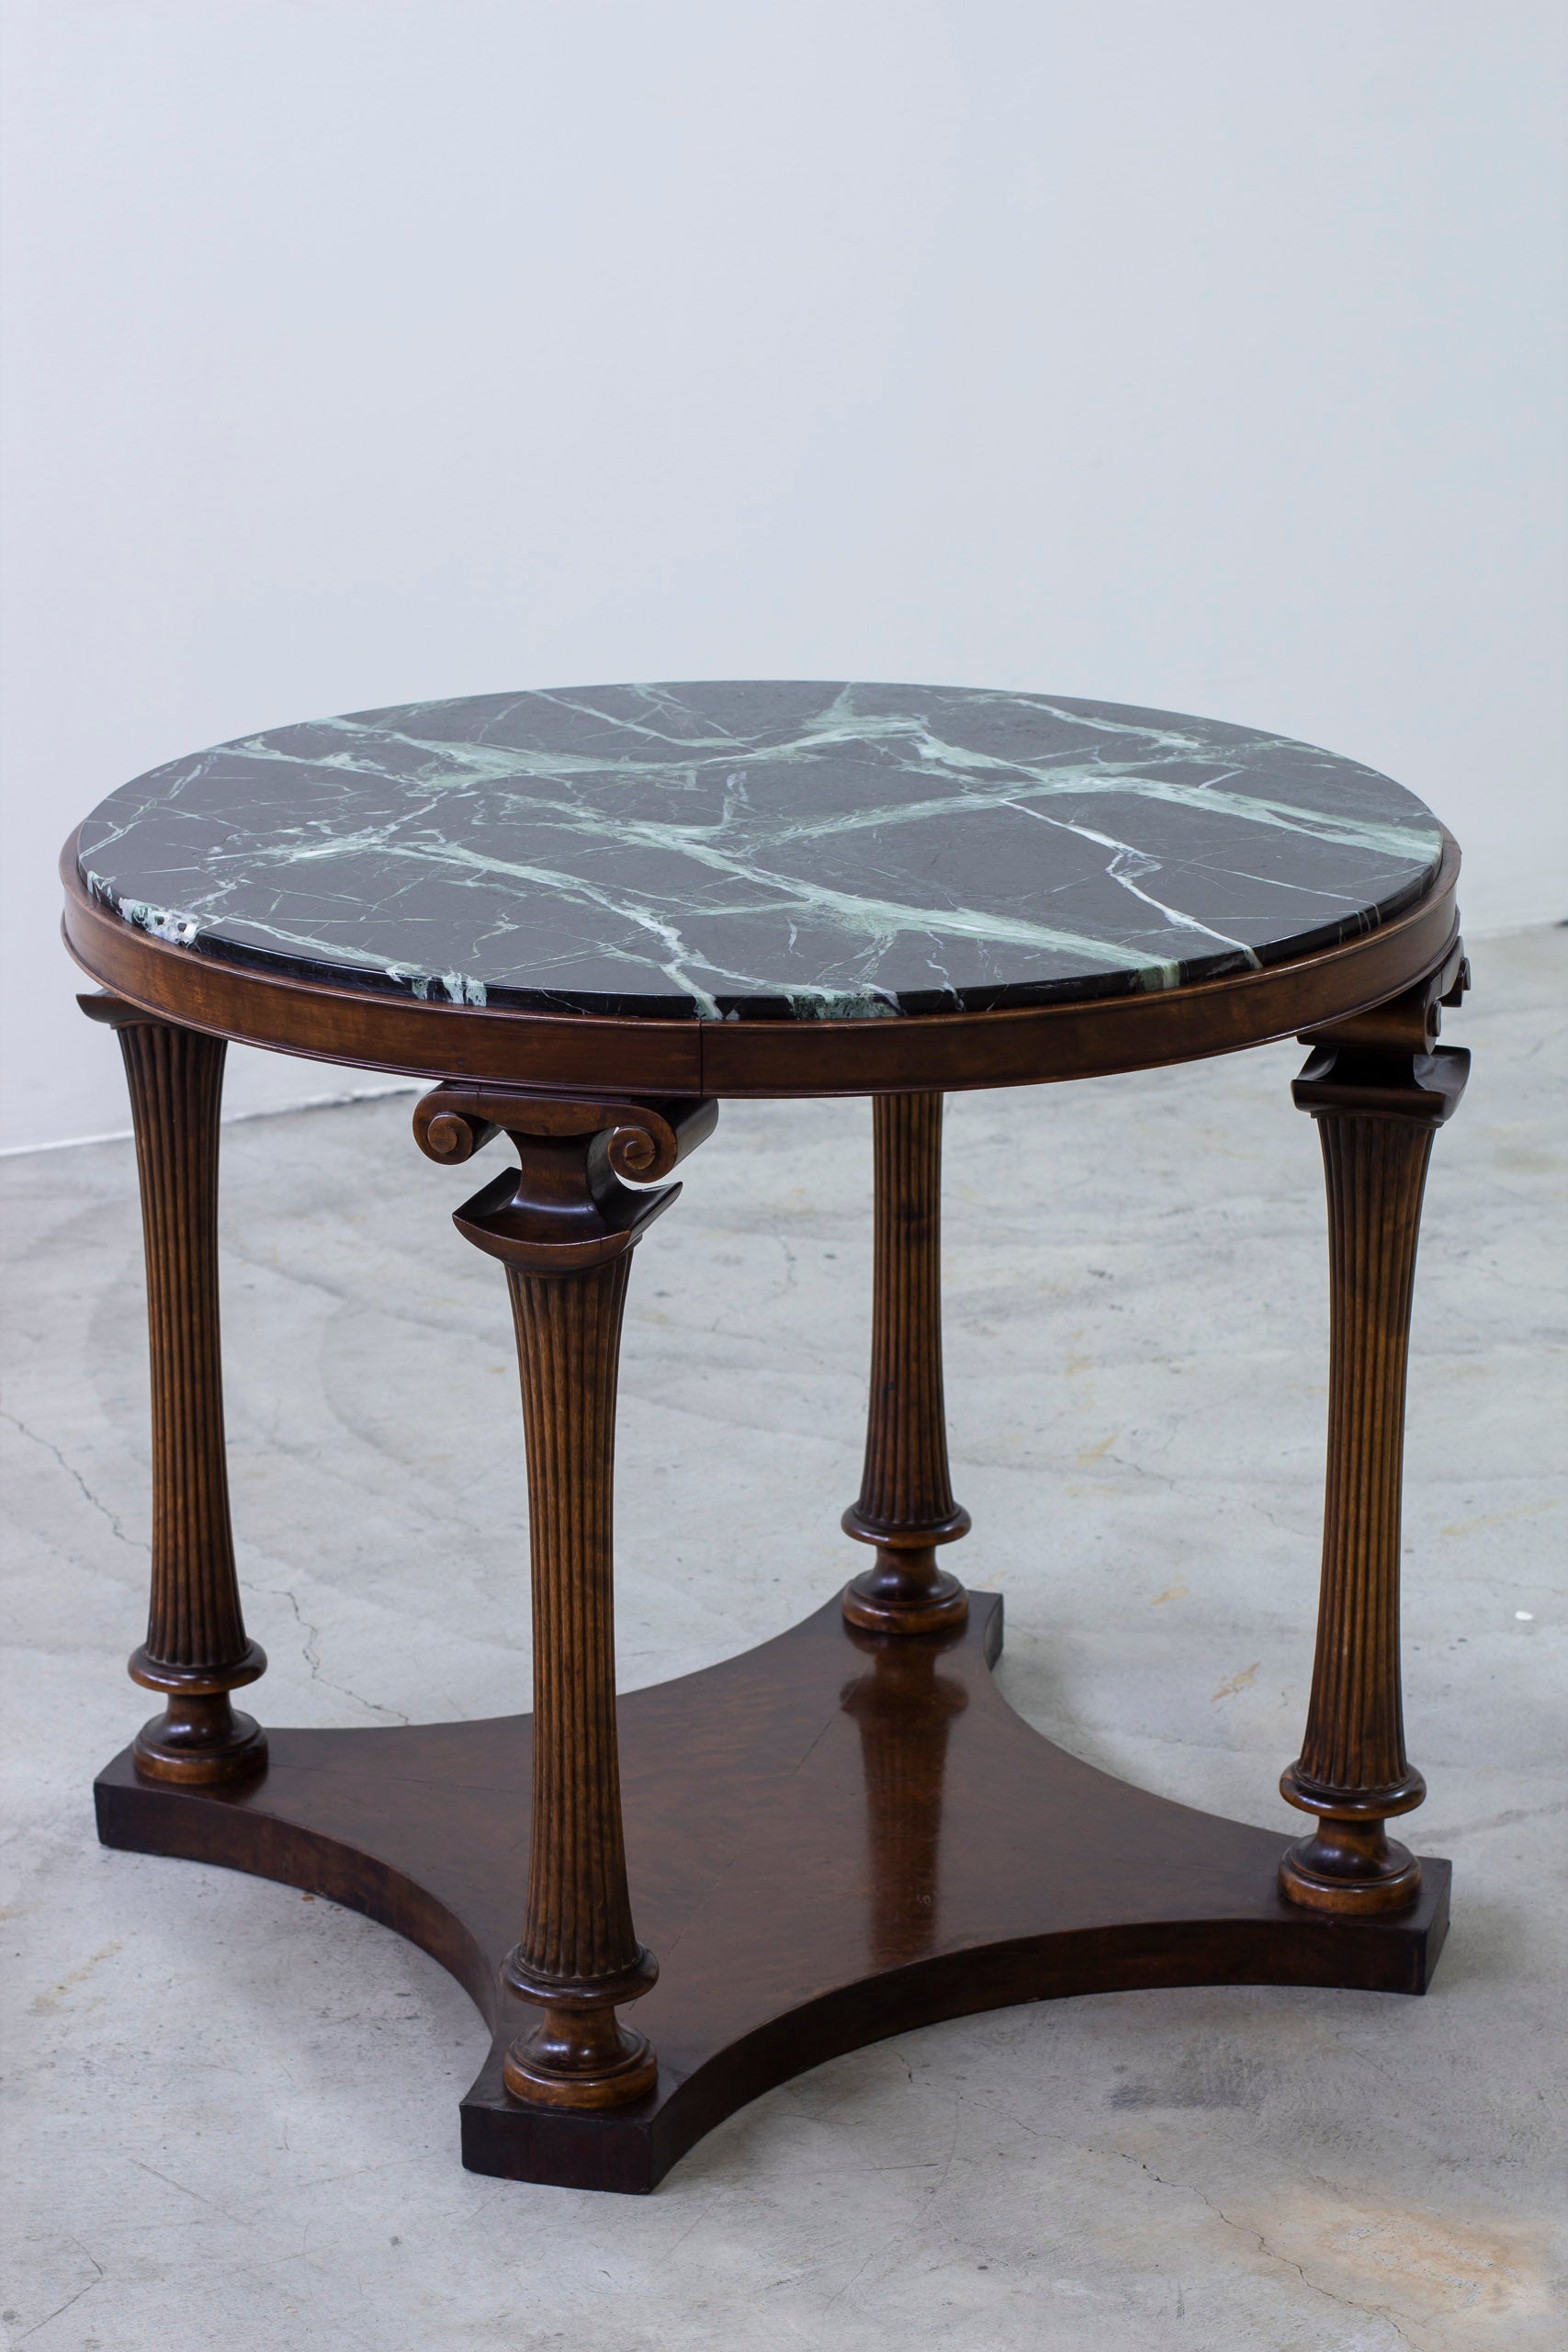 Neoclassical entrance table in the manner of Hjorth